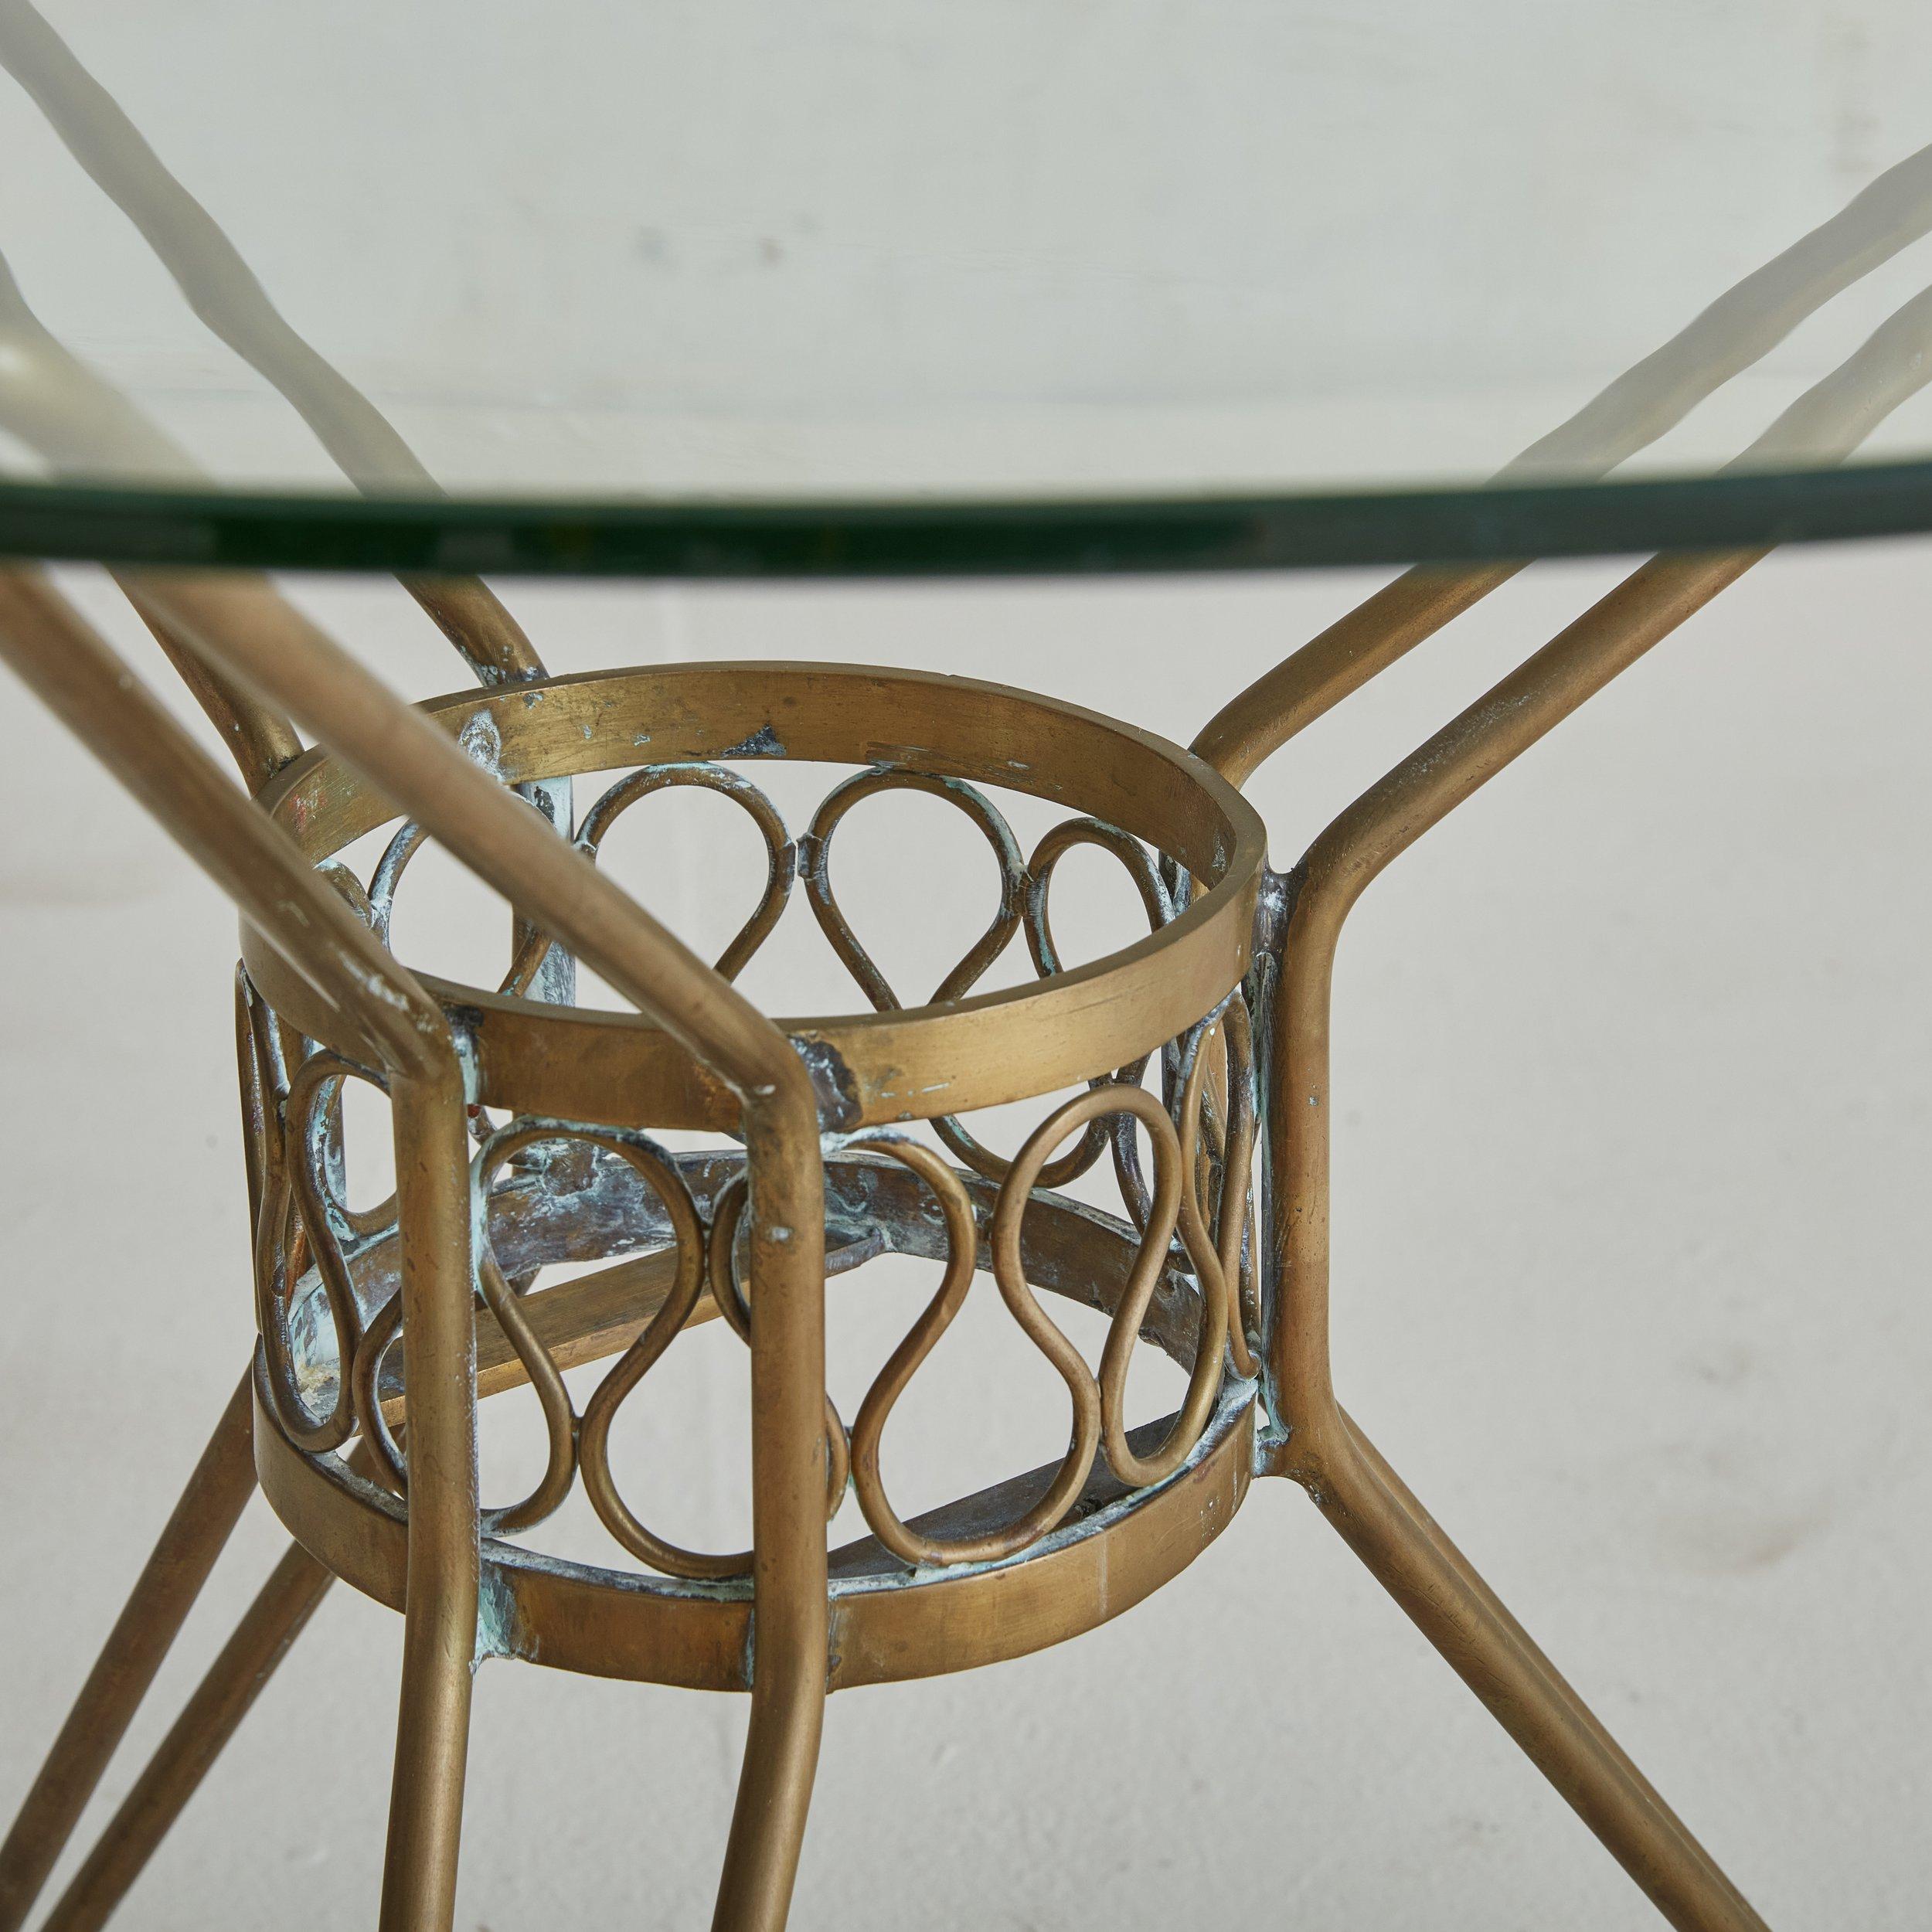 A 1960s Italian accent table featuring a beautifully patinated brass and a charming squiggle motif along the frame. Completed with a new round glass top. 
 

DIMENSIONS: 26.25